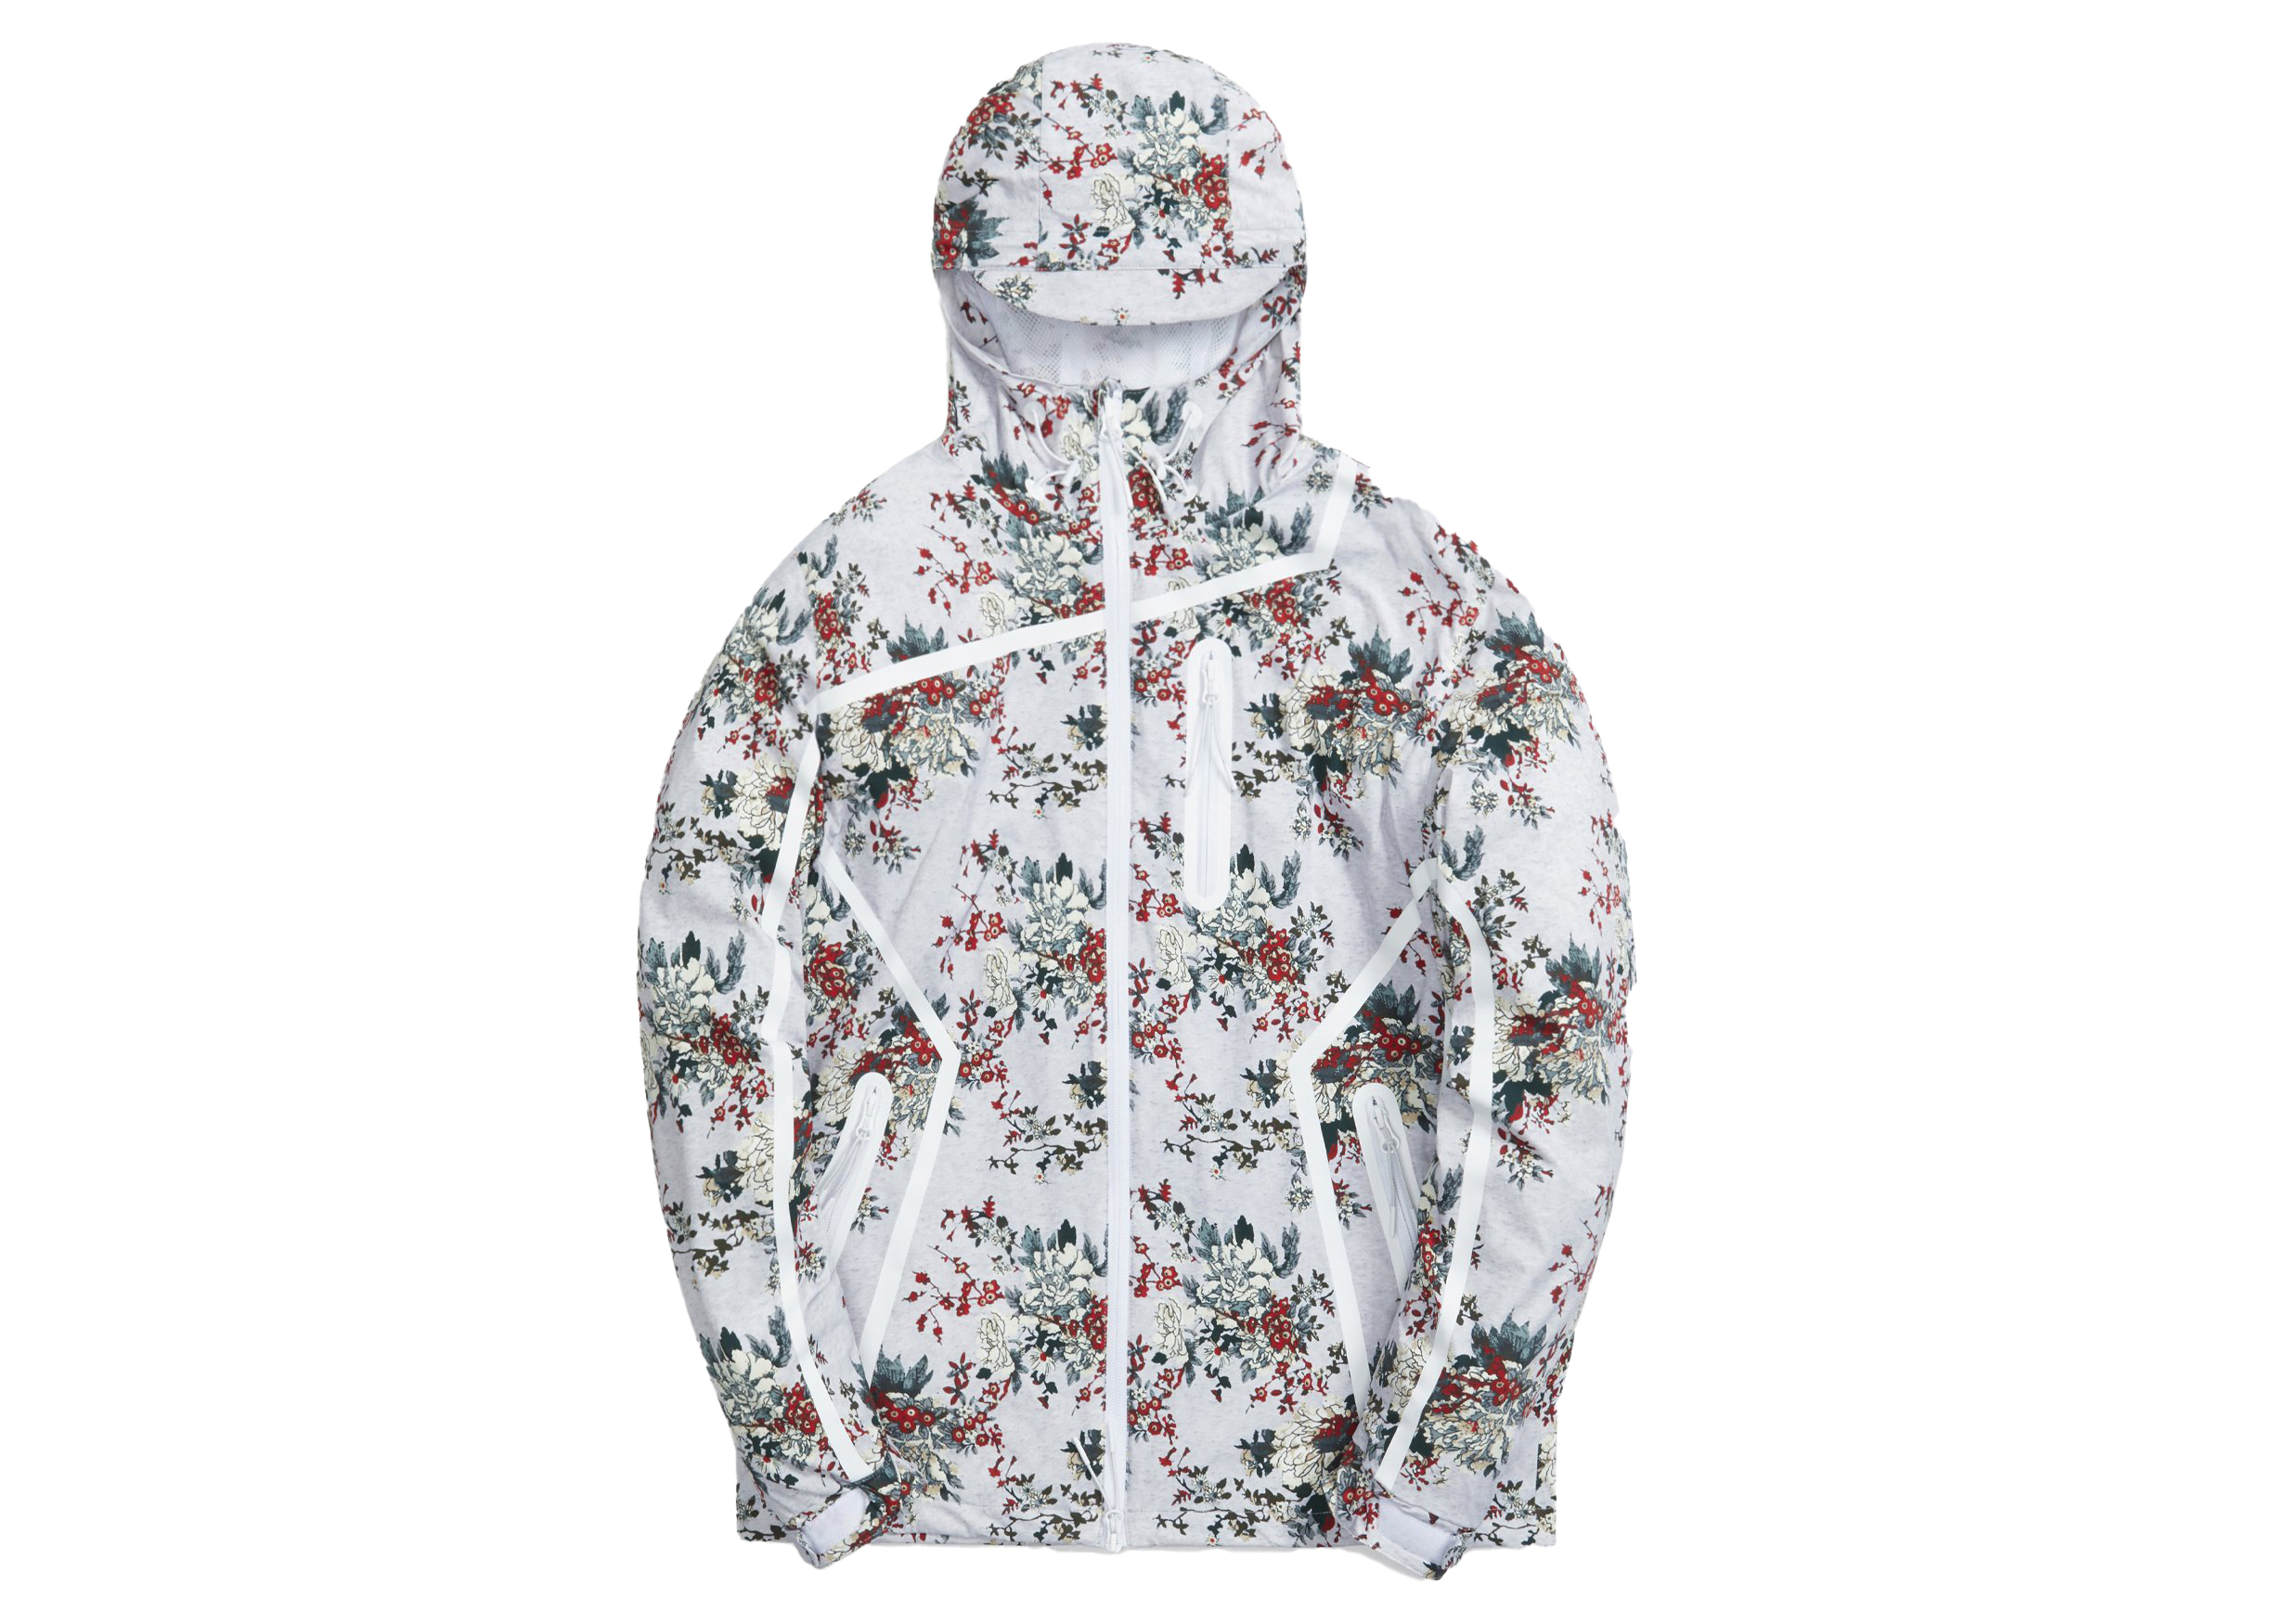 Kith Tapestry Floral Madison Jacket